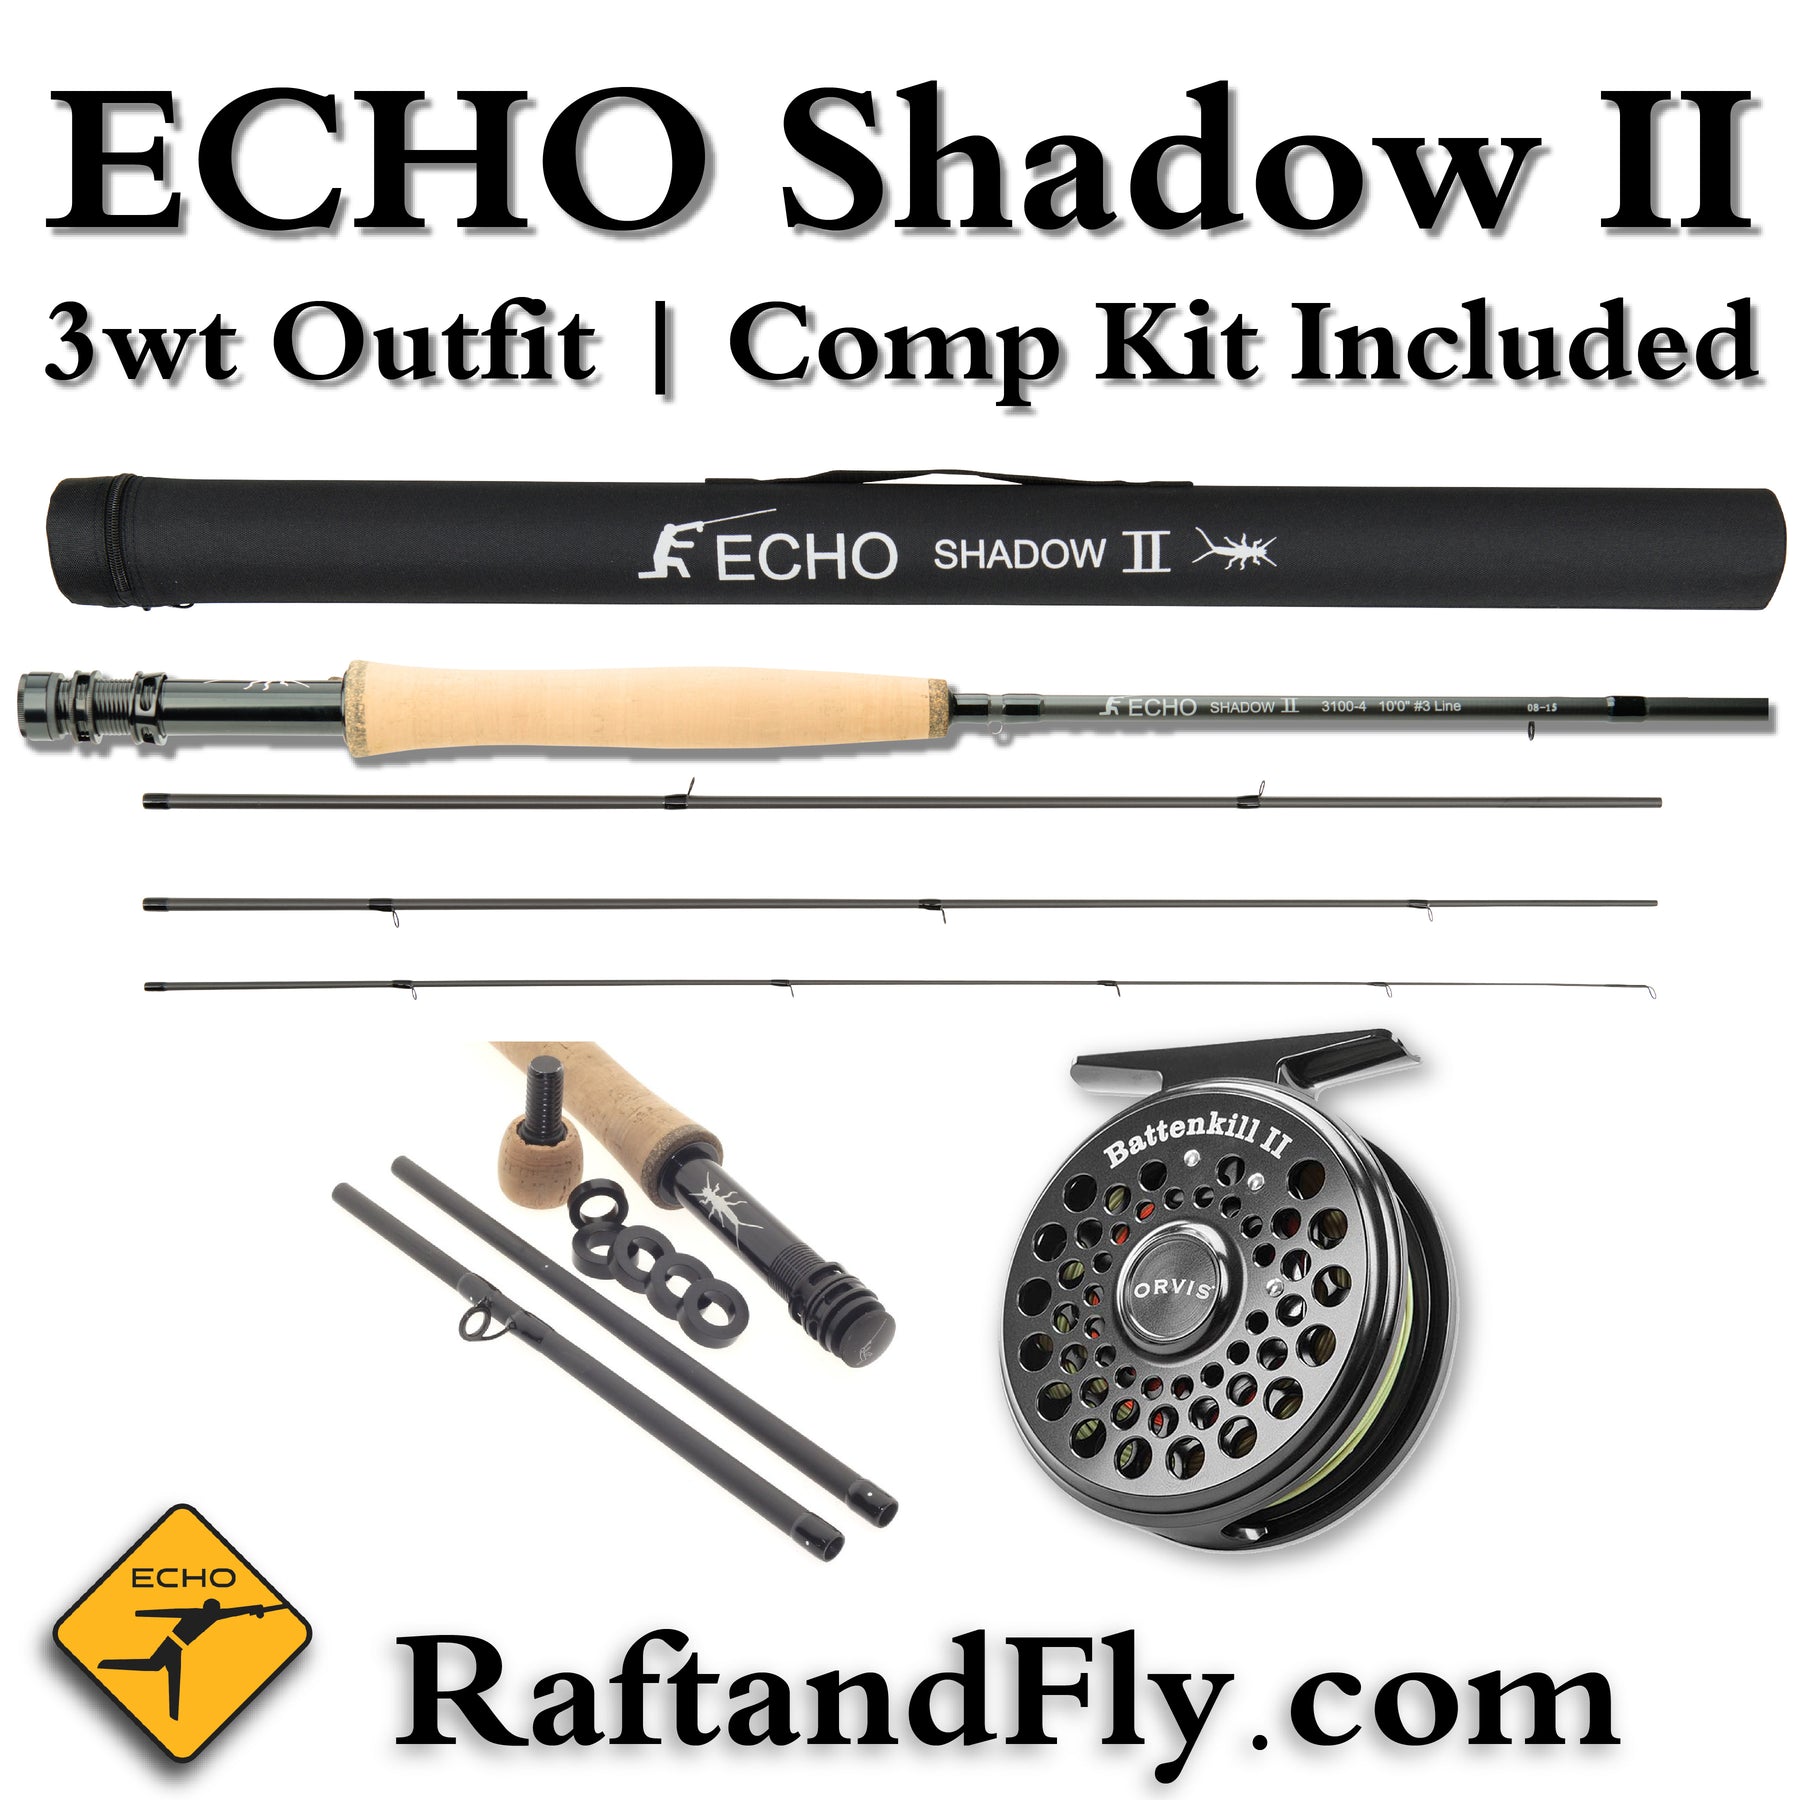 Echo Shadow II 3wt 10'0 - 11'0 with Free Competition Kit - Add